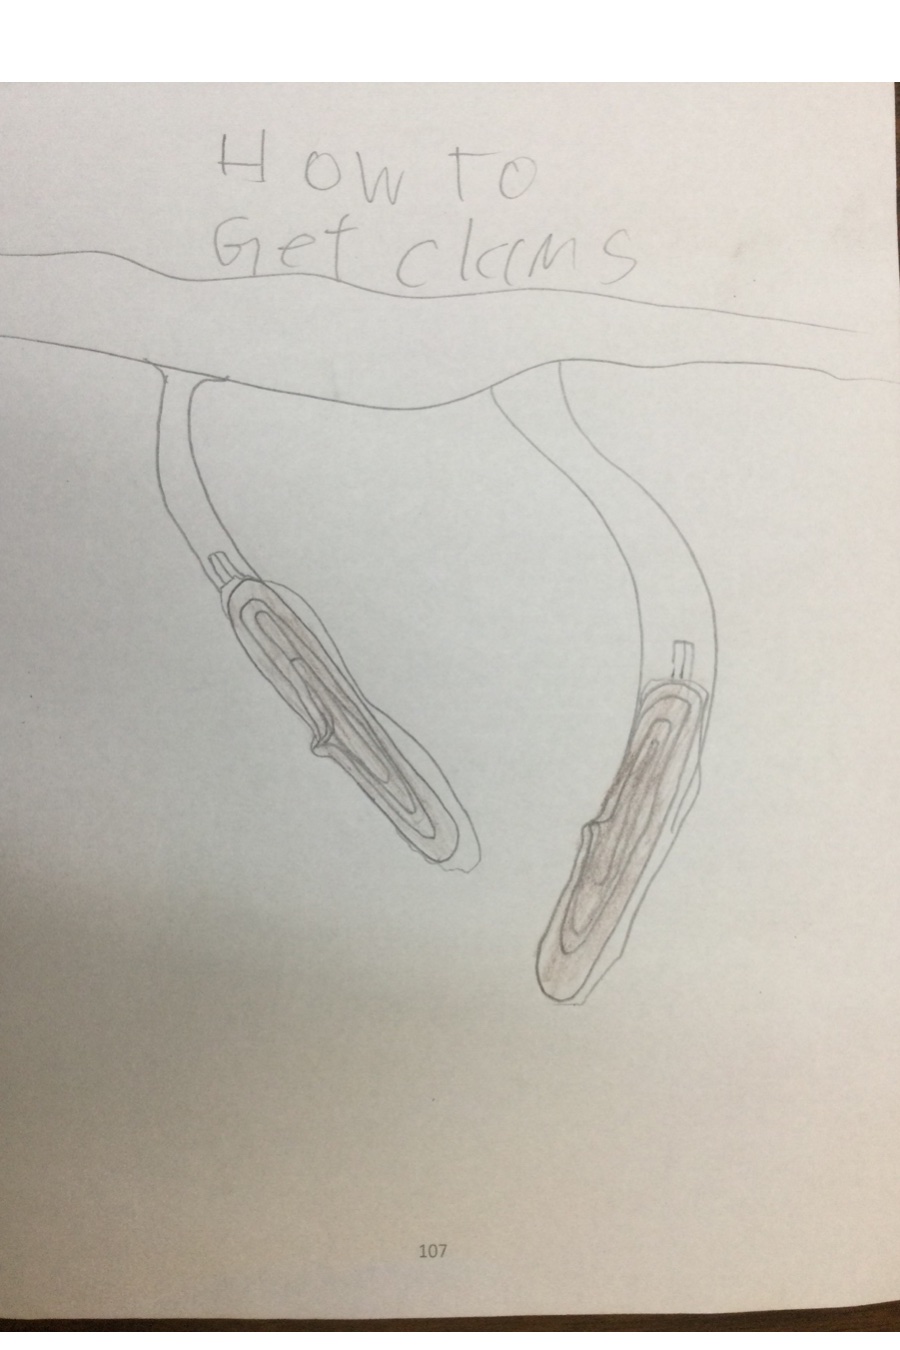 How to Find Clams by Scott T